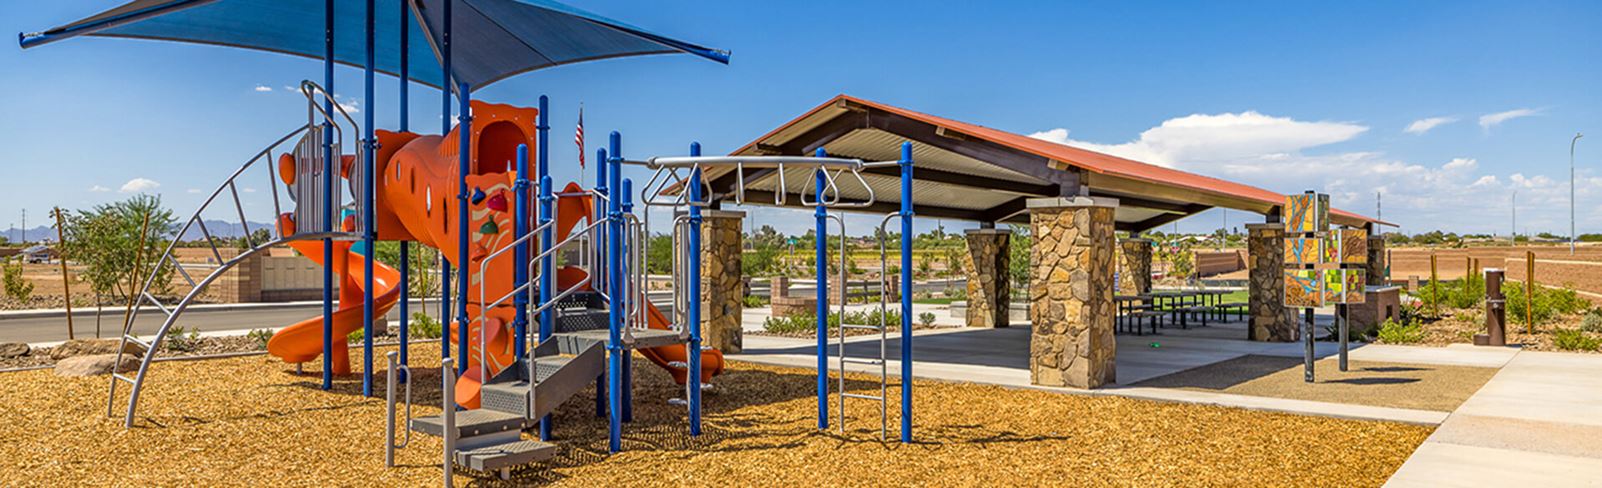 Yellowbell Court Park playground and covered structure at Alamar community in Avondale, Arizona